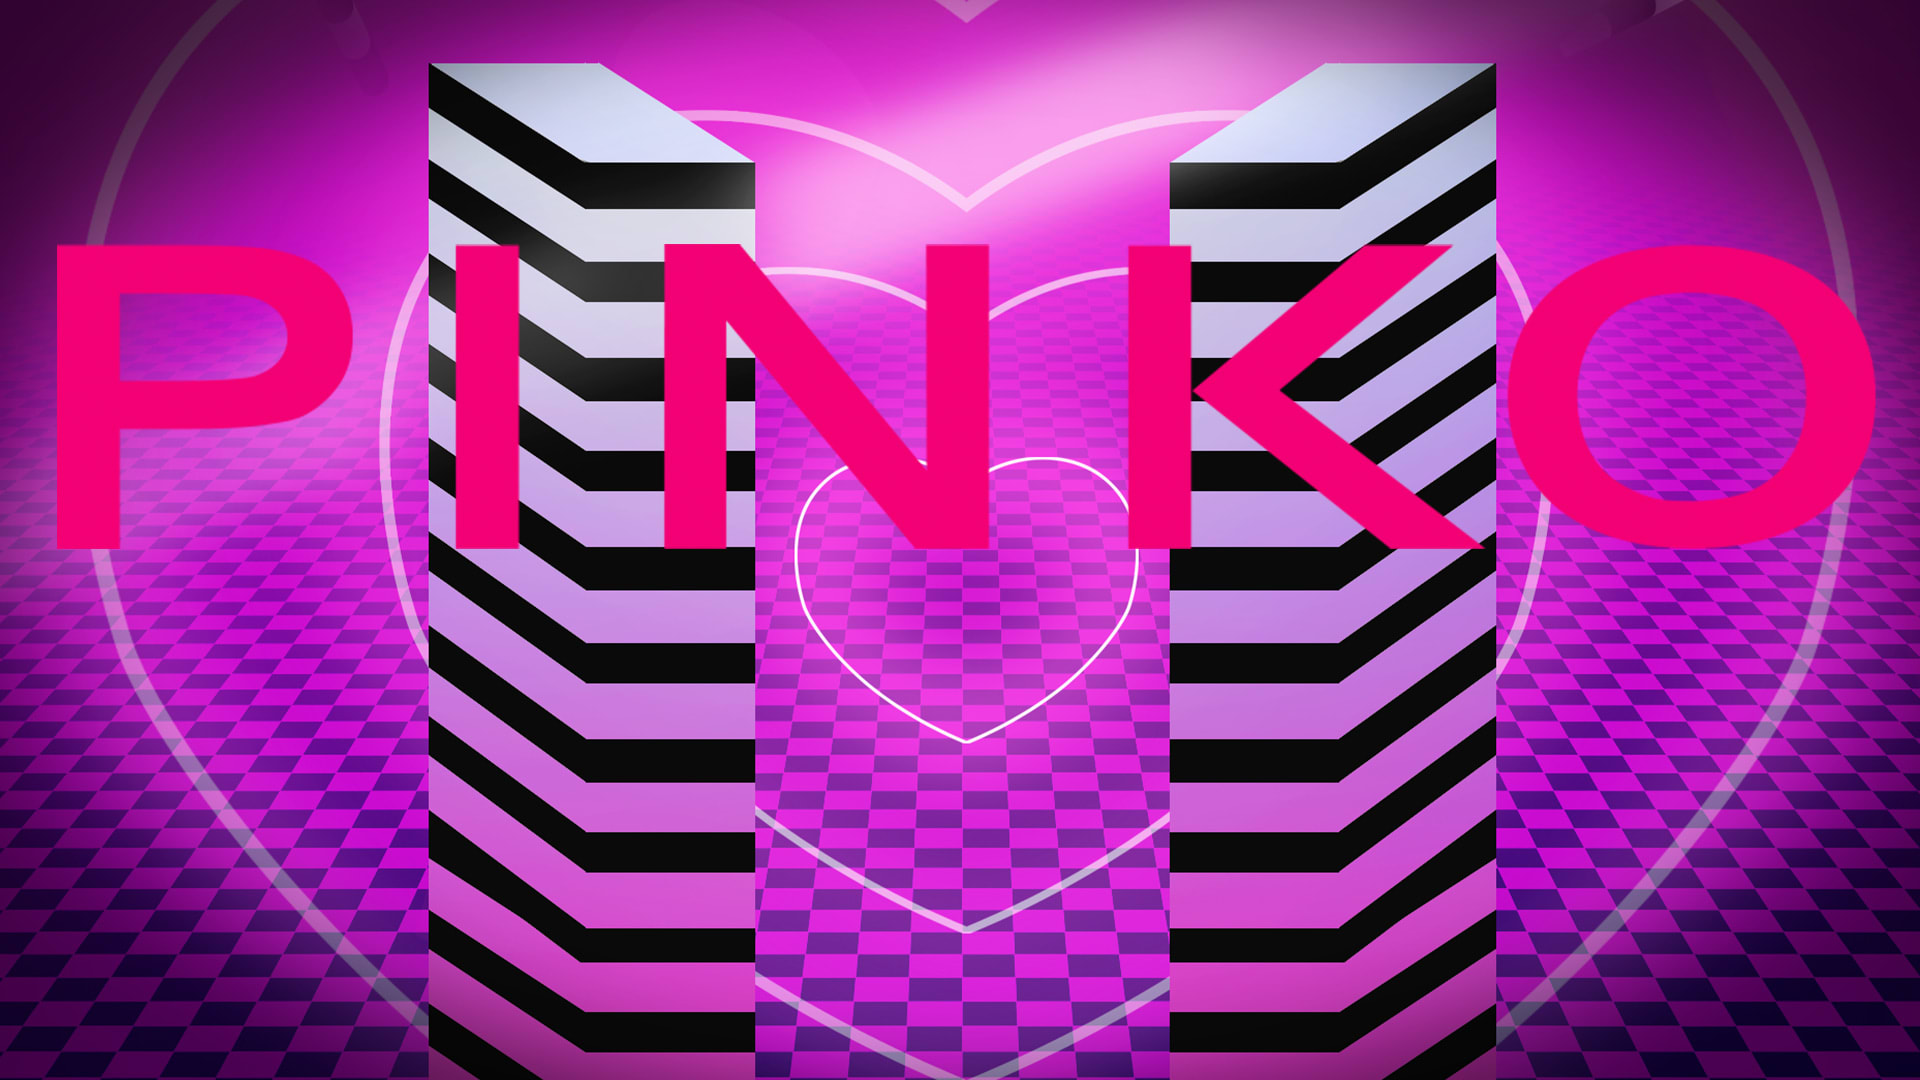  SPREAD THE LOVE with the new level on our app! 